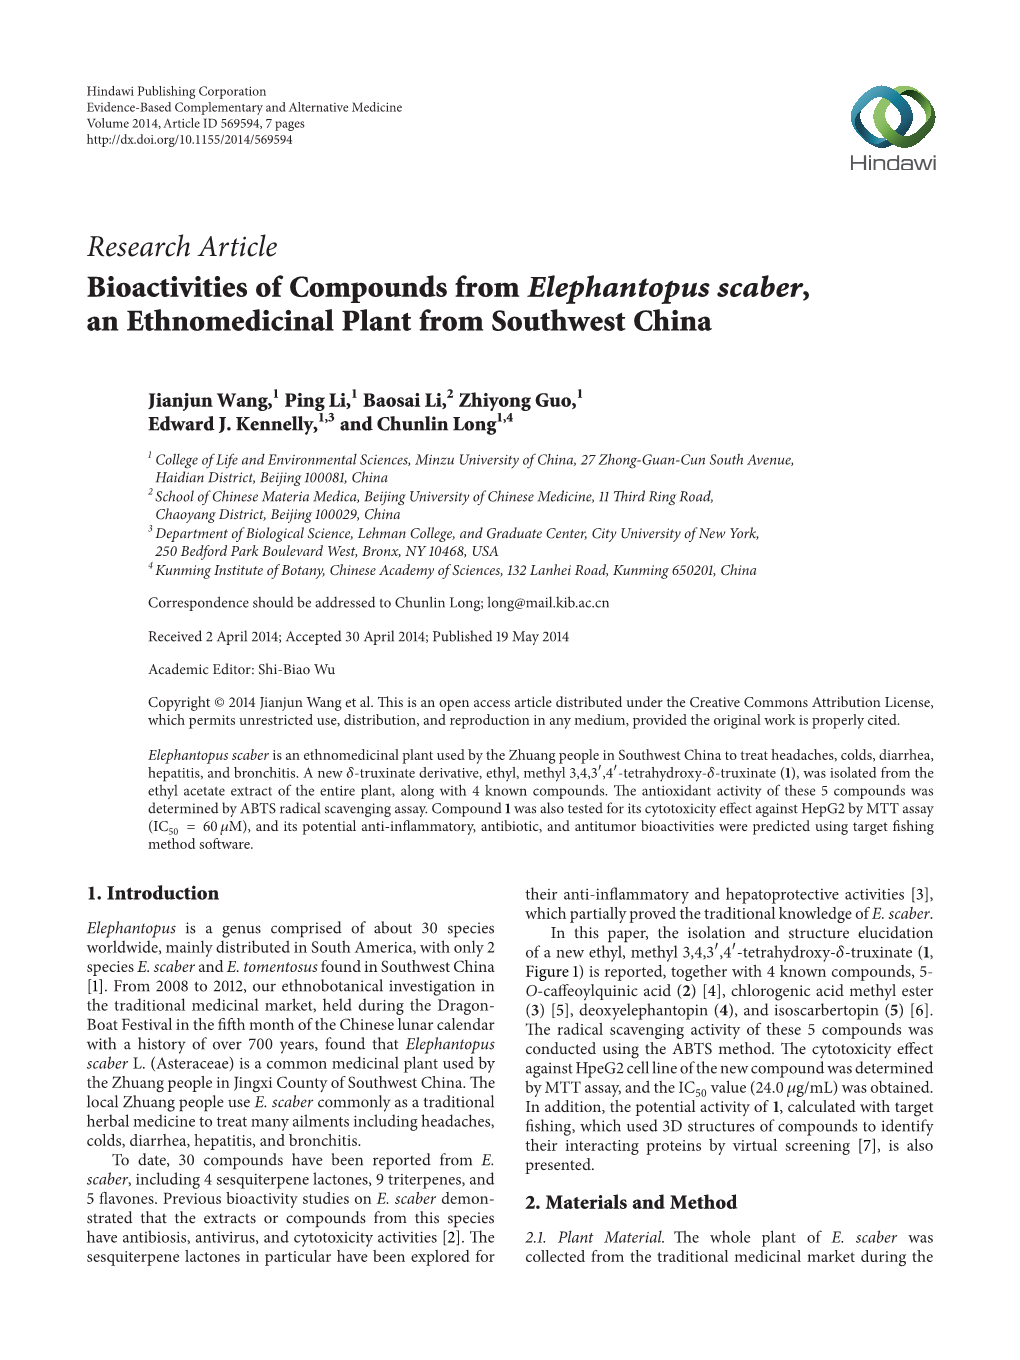 Bioactivities of Compounds from Elephantopus Scaber, an Ethnomedicinal Plant from Southwest China